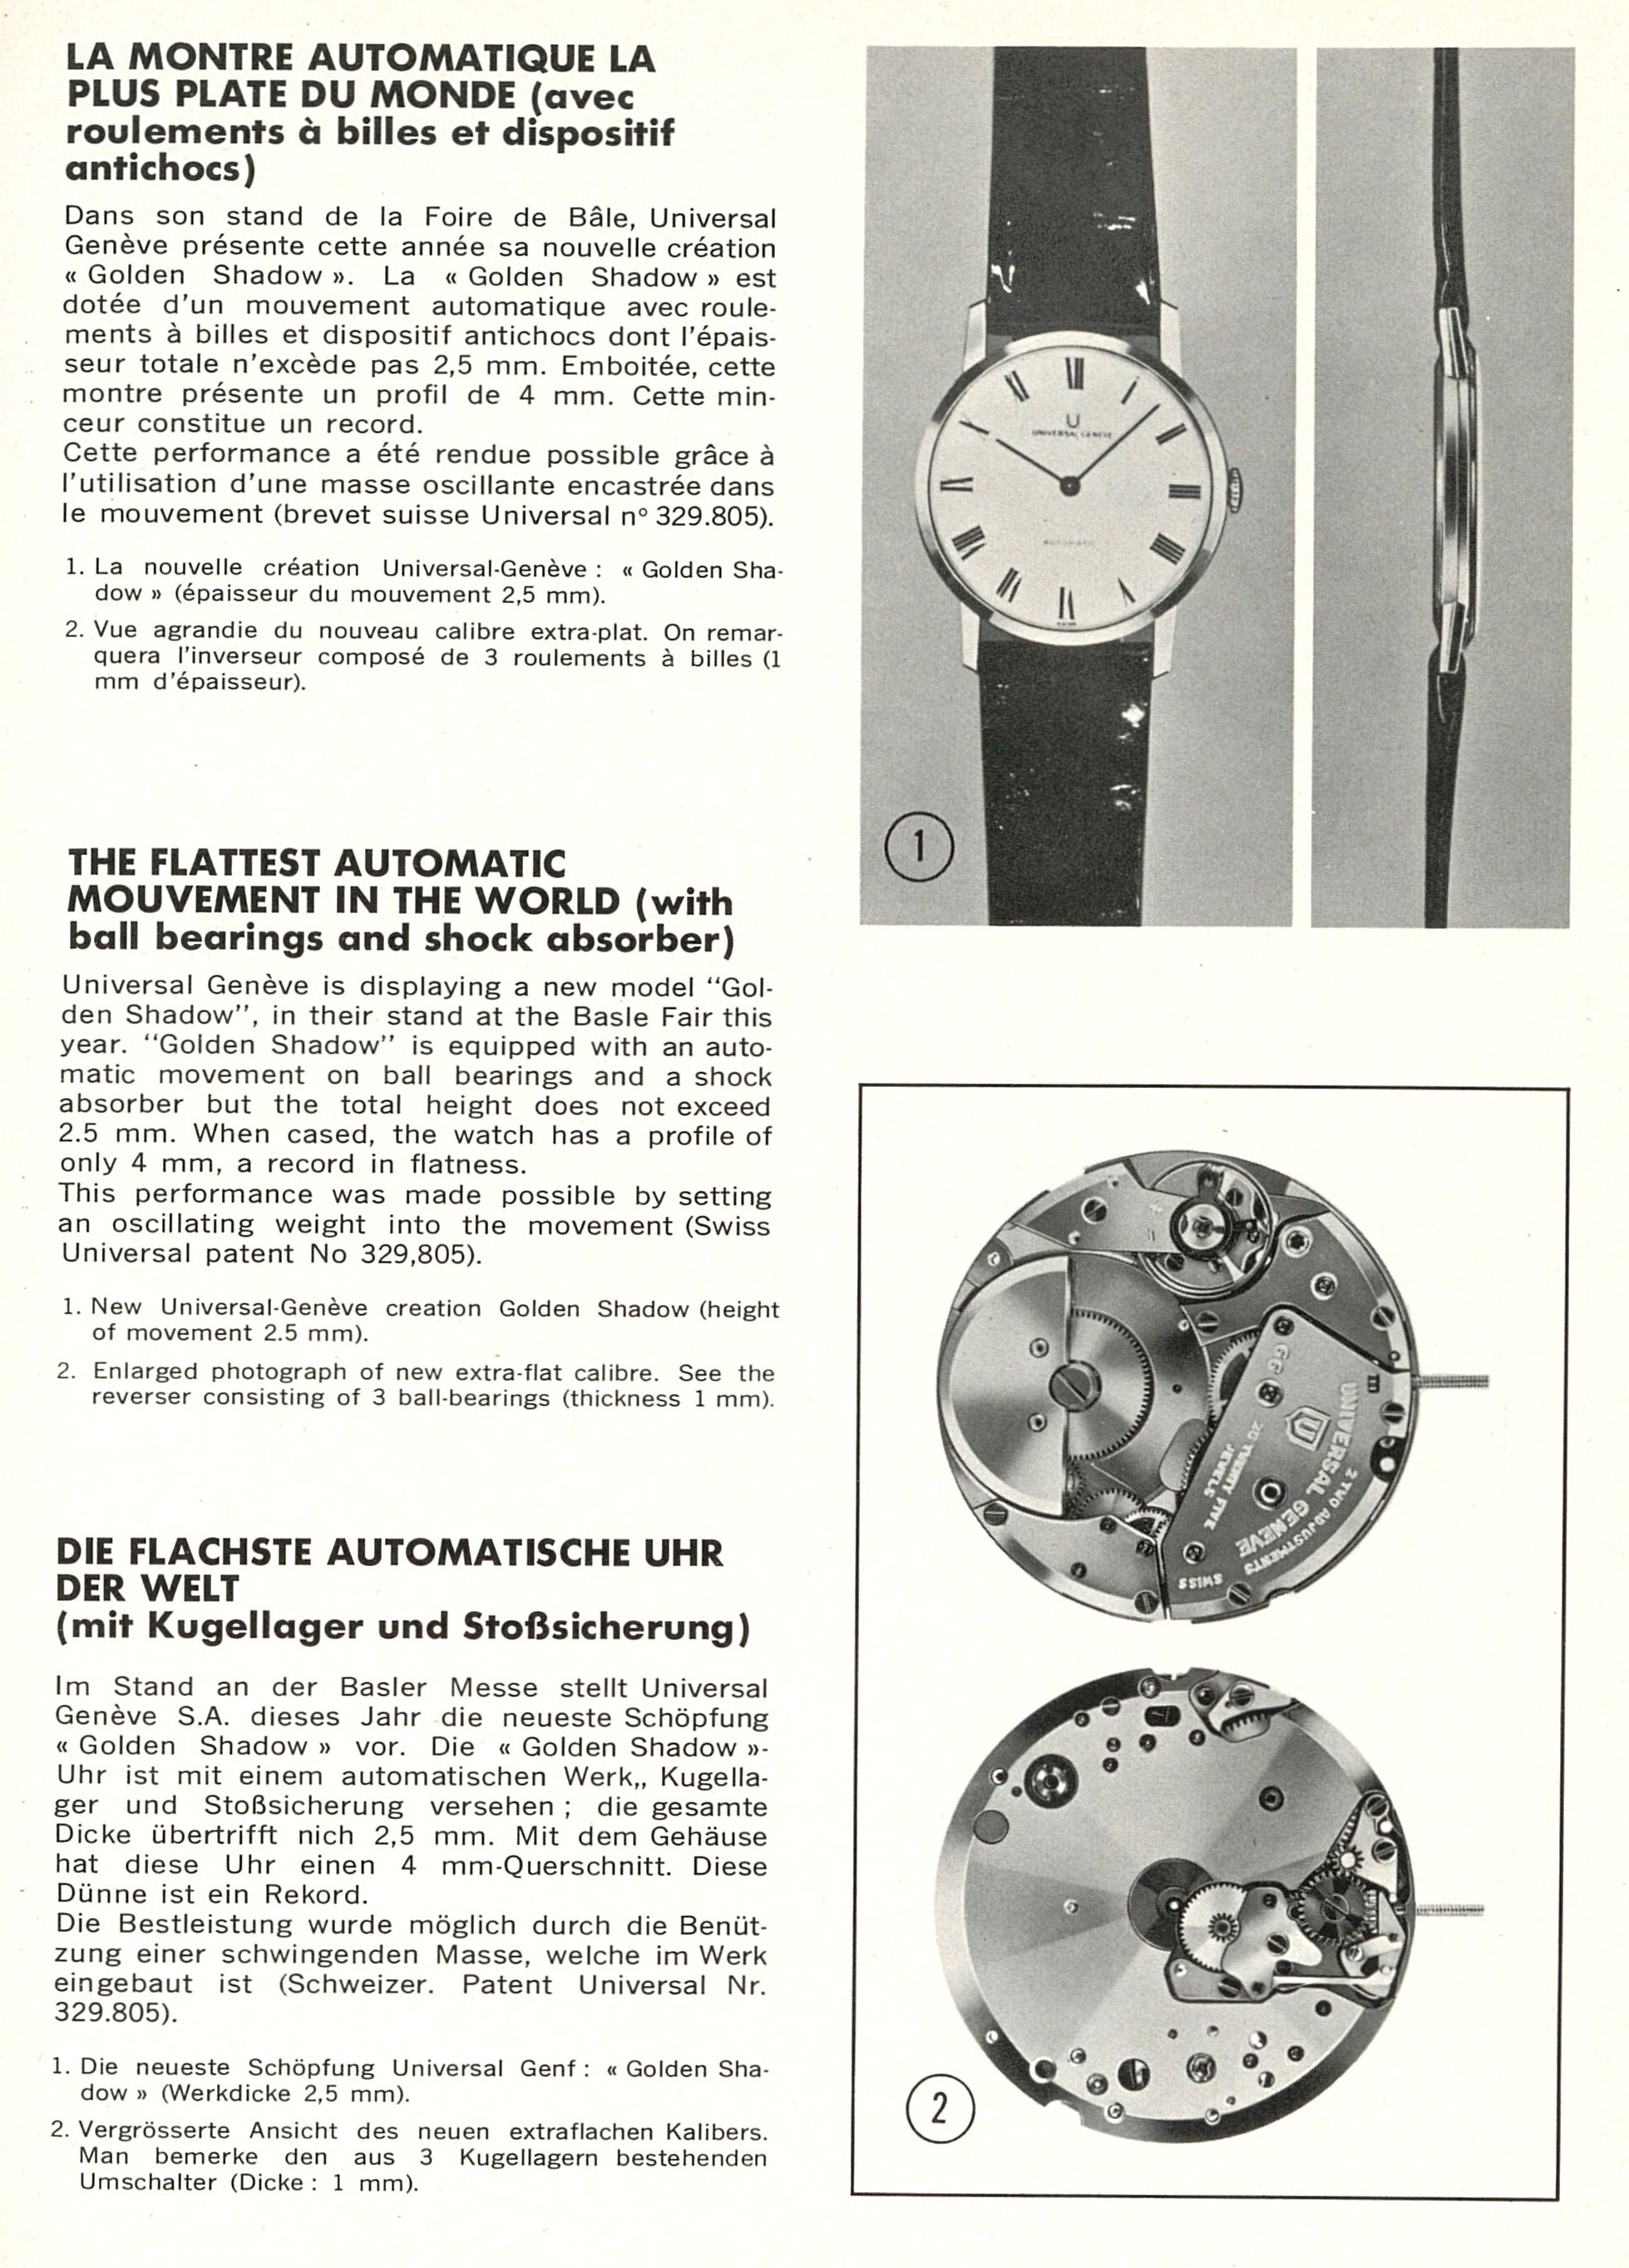 09_Universal_Geneve_advertising_for_the_Golden_Shadow_watch_published_in_Europa_Star_in_1966 Lifestyle